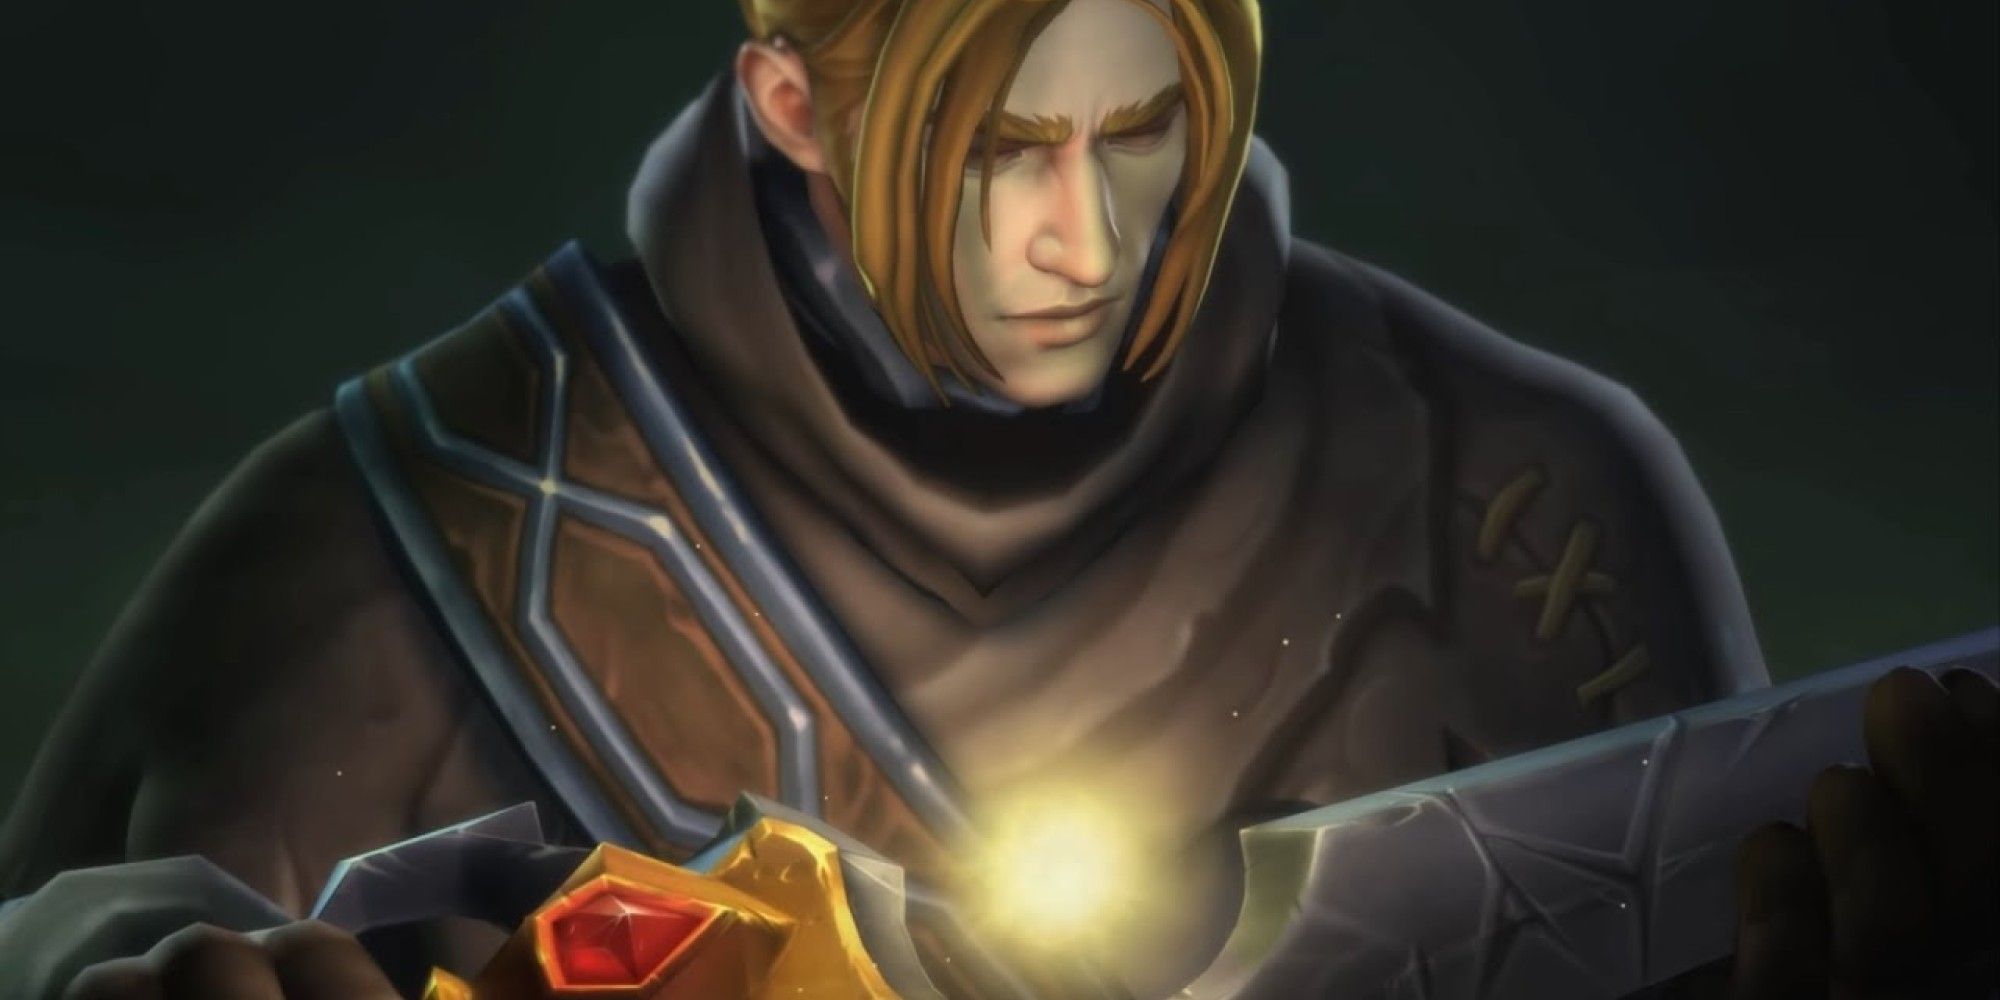 World of Warcraft Anduin holding his fathers sword